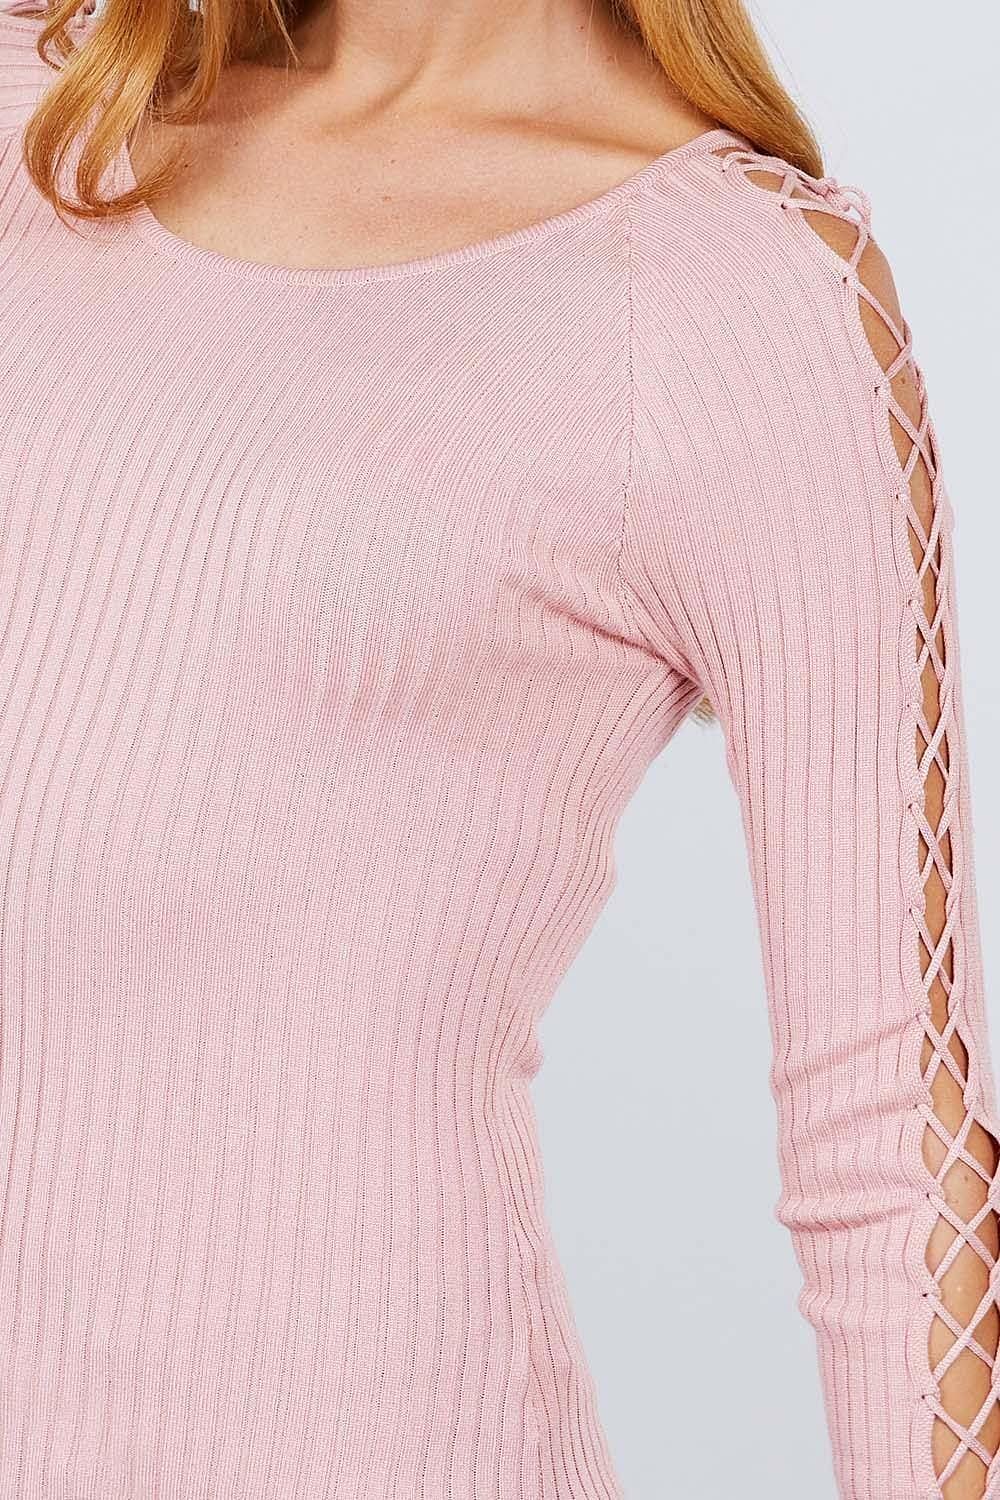 Pink Long Sleeve Scoop Neck Top - Shopping Therapy Top